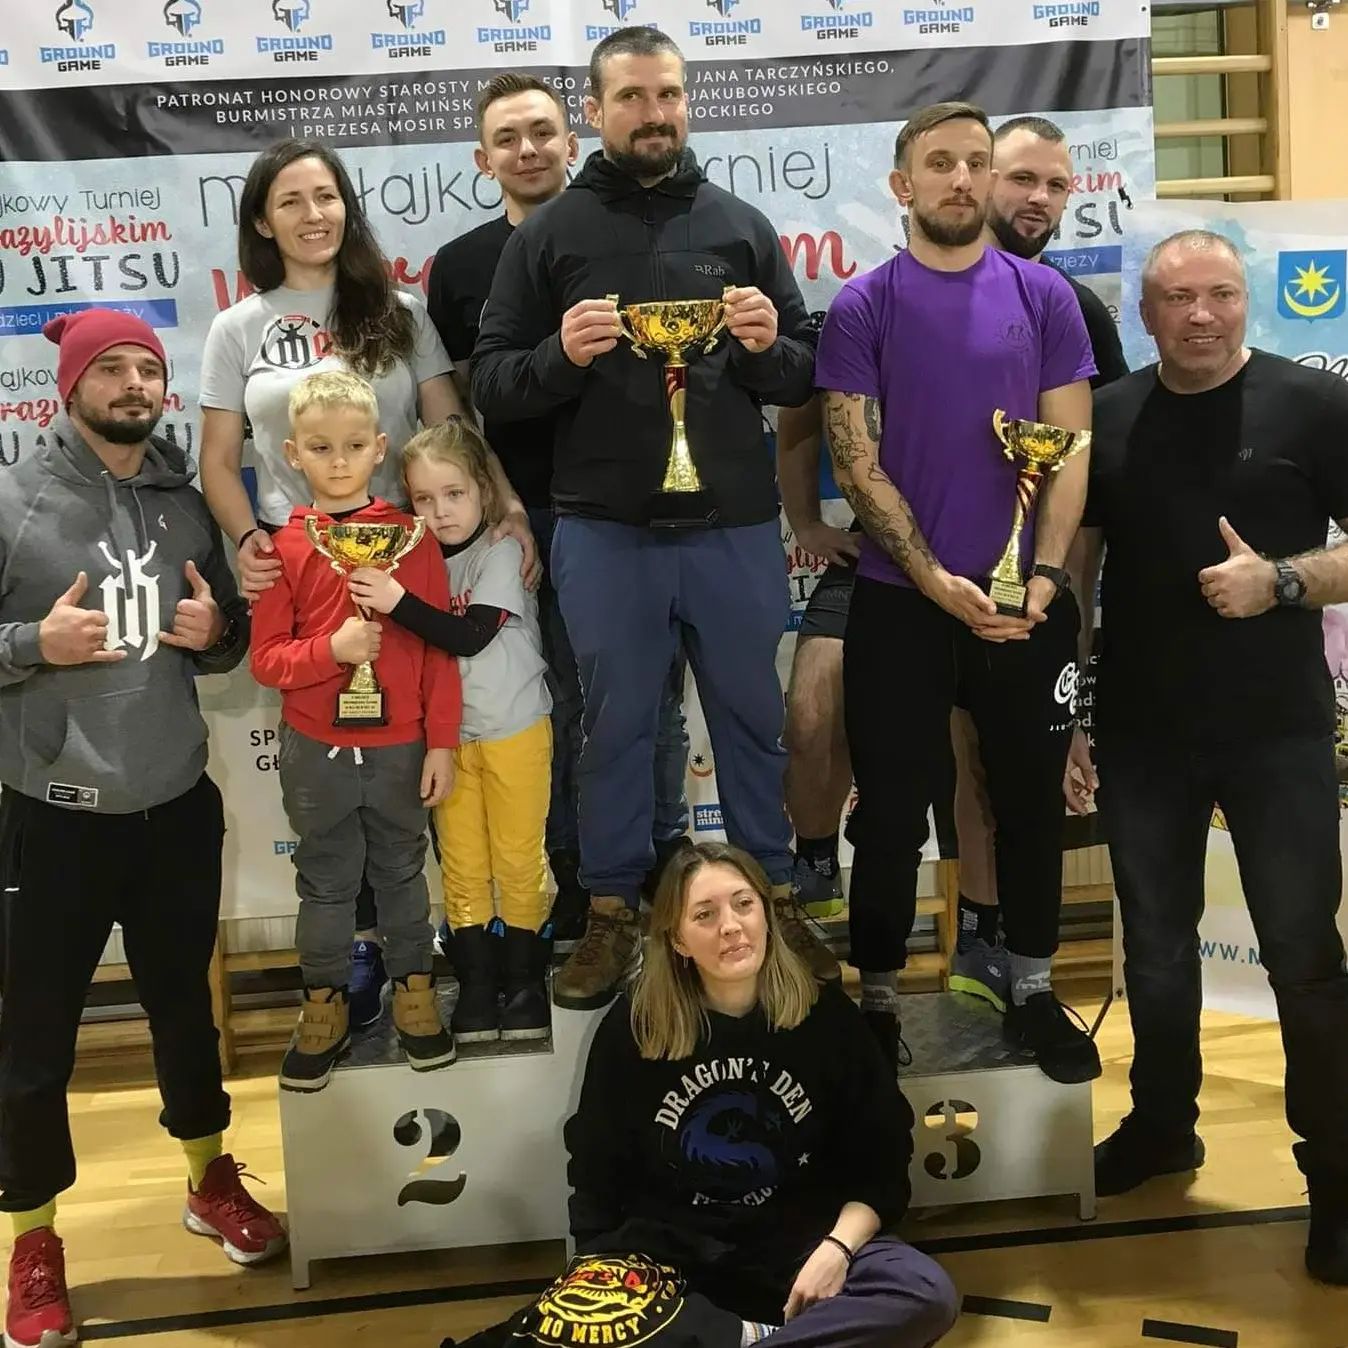 BJJ team seating at the platform holding medals and trophies